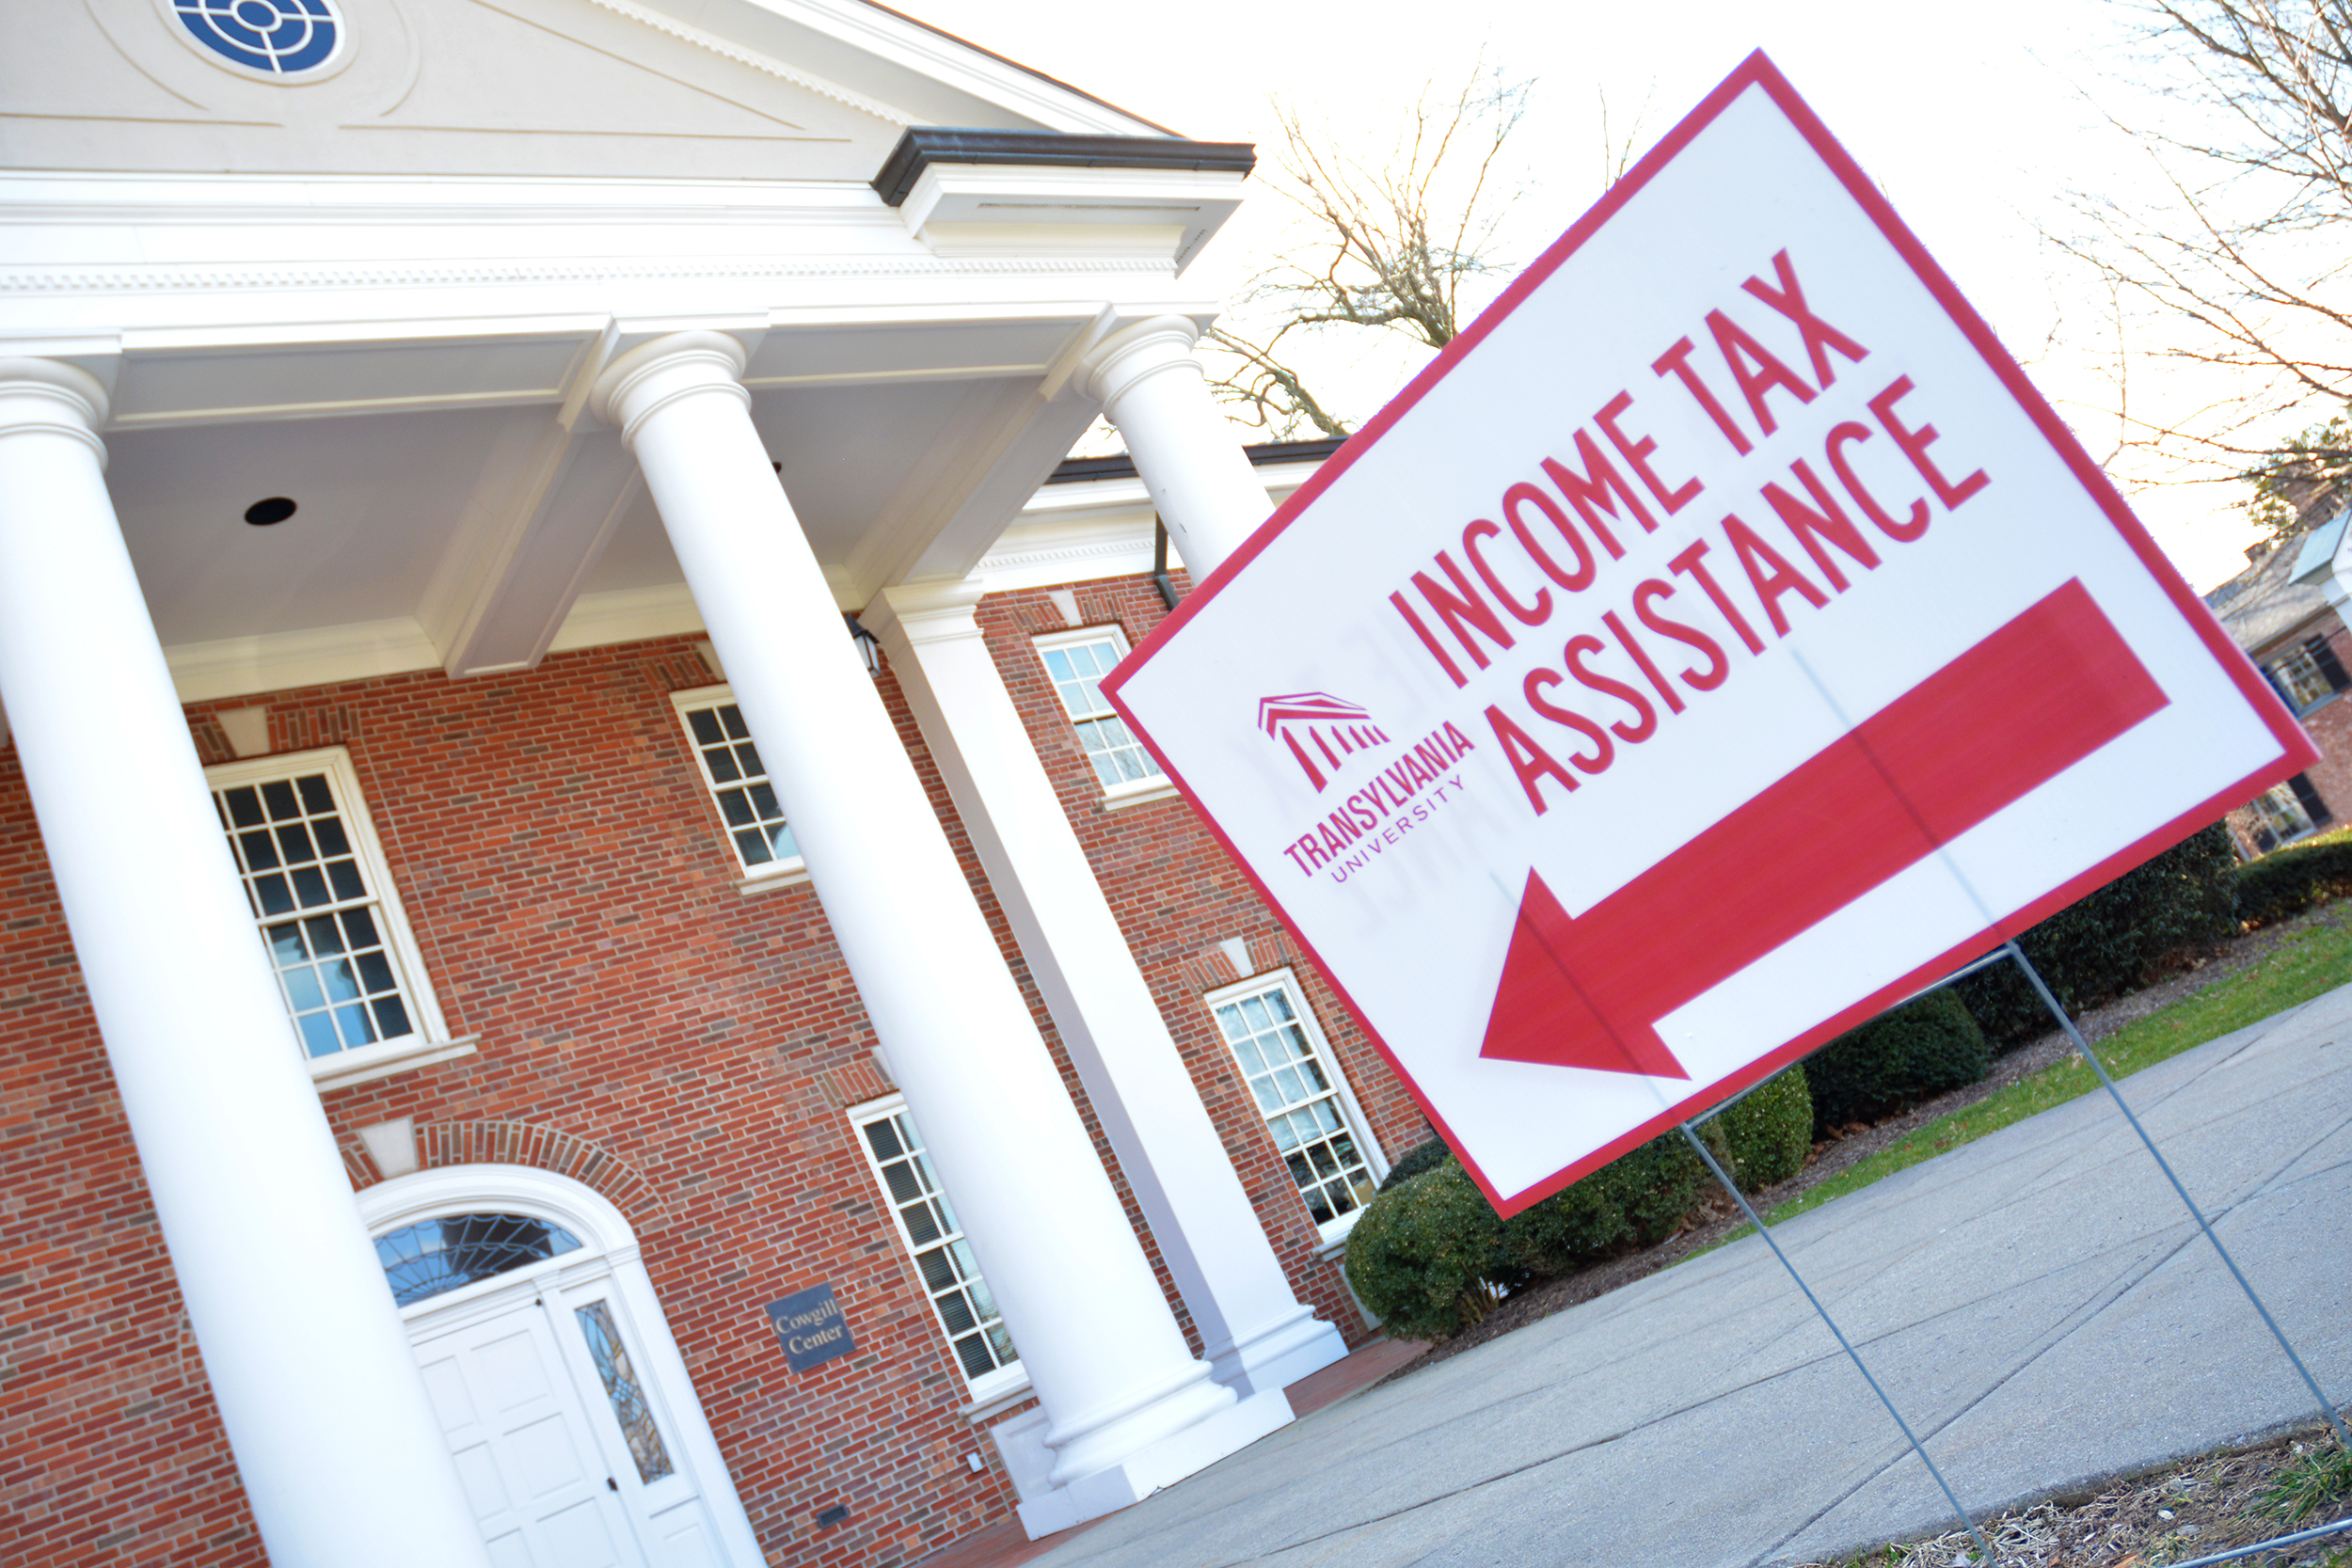 Transylvania accounting students provide free income tax assistance